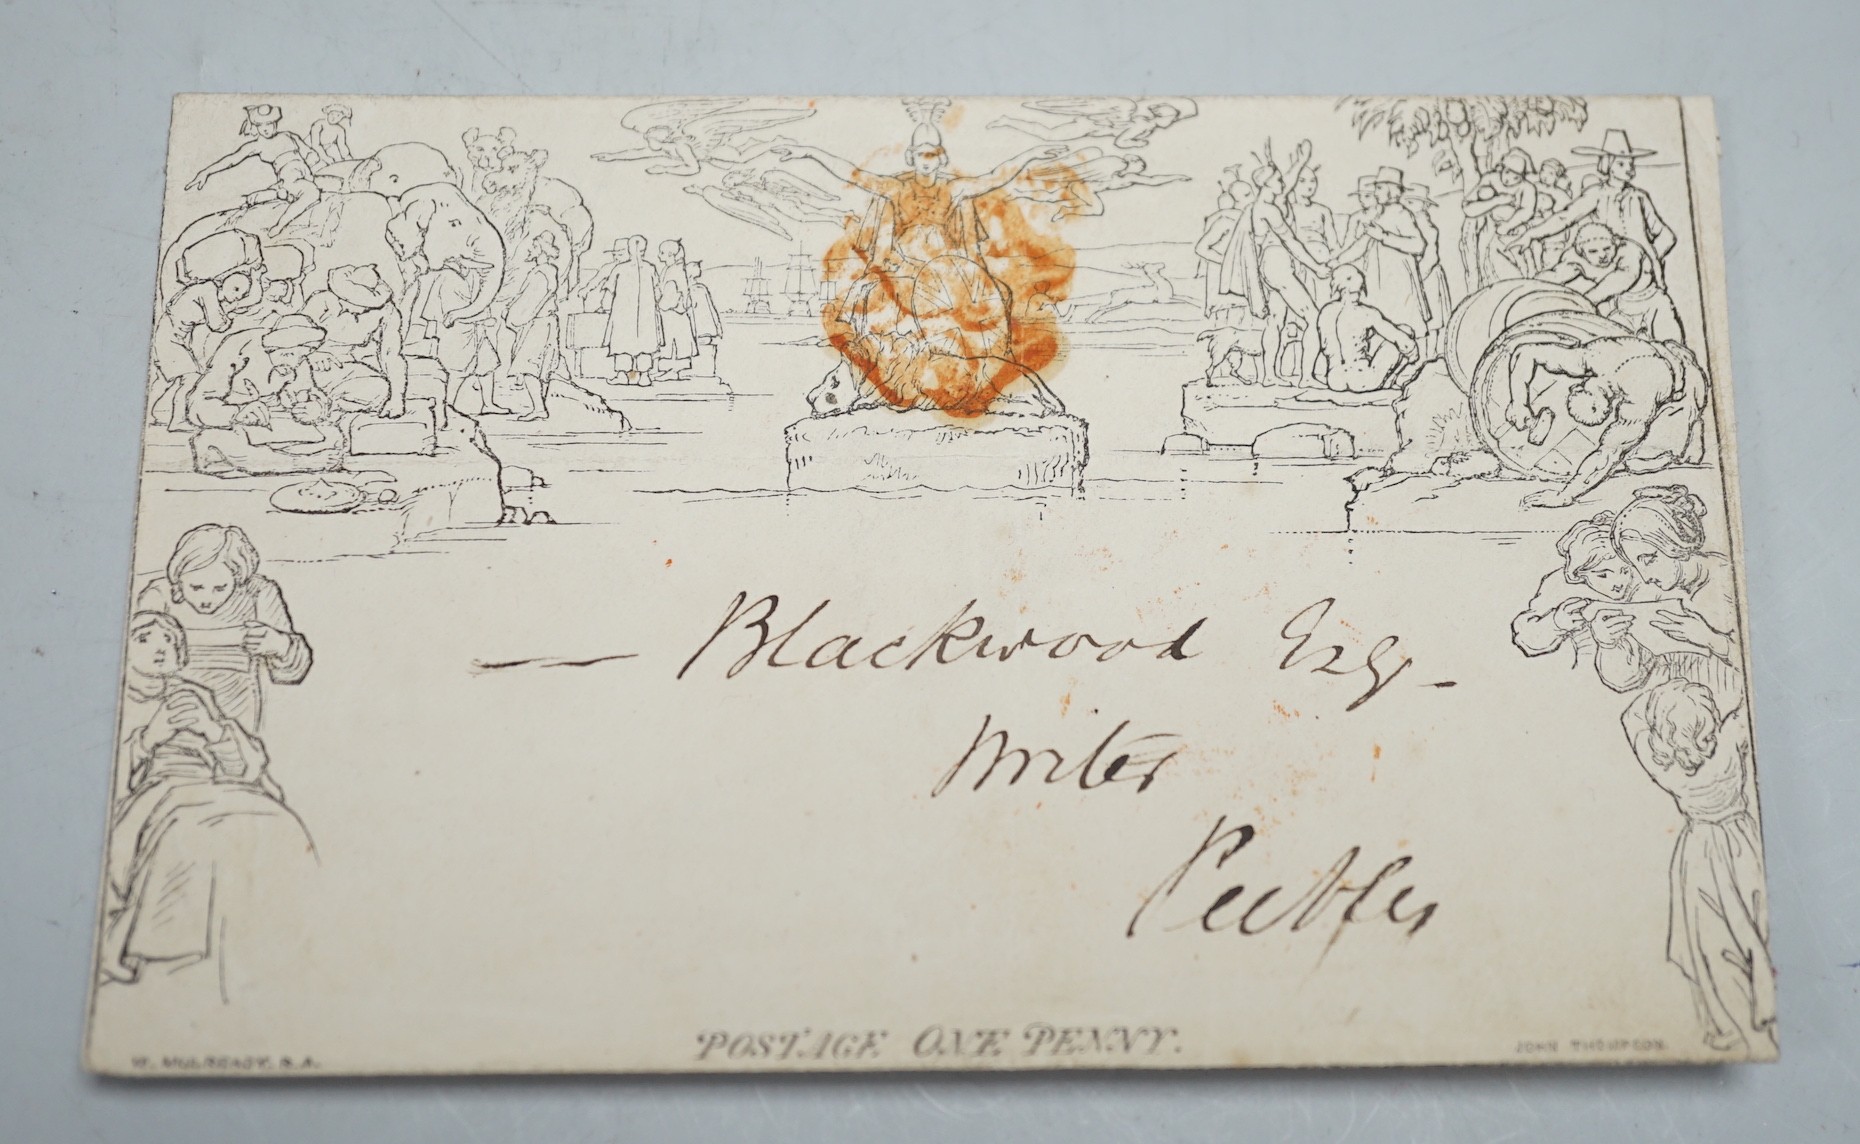 Stamps: Mulready penny cover July 31 1840